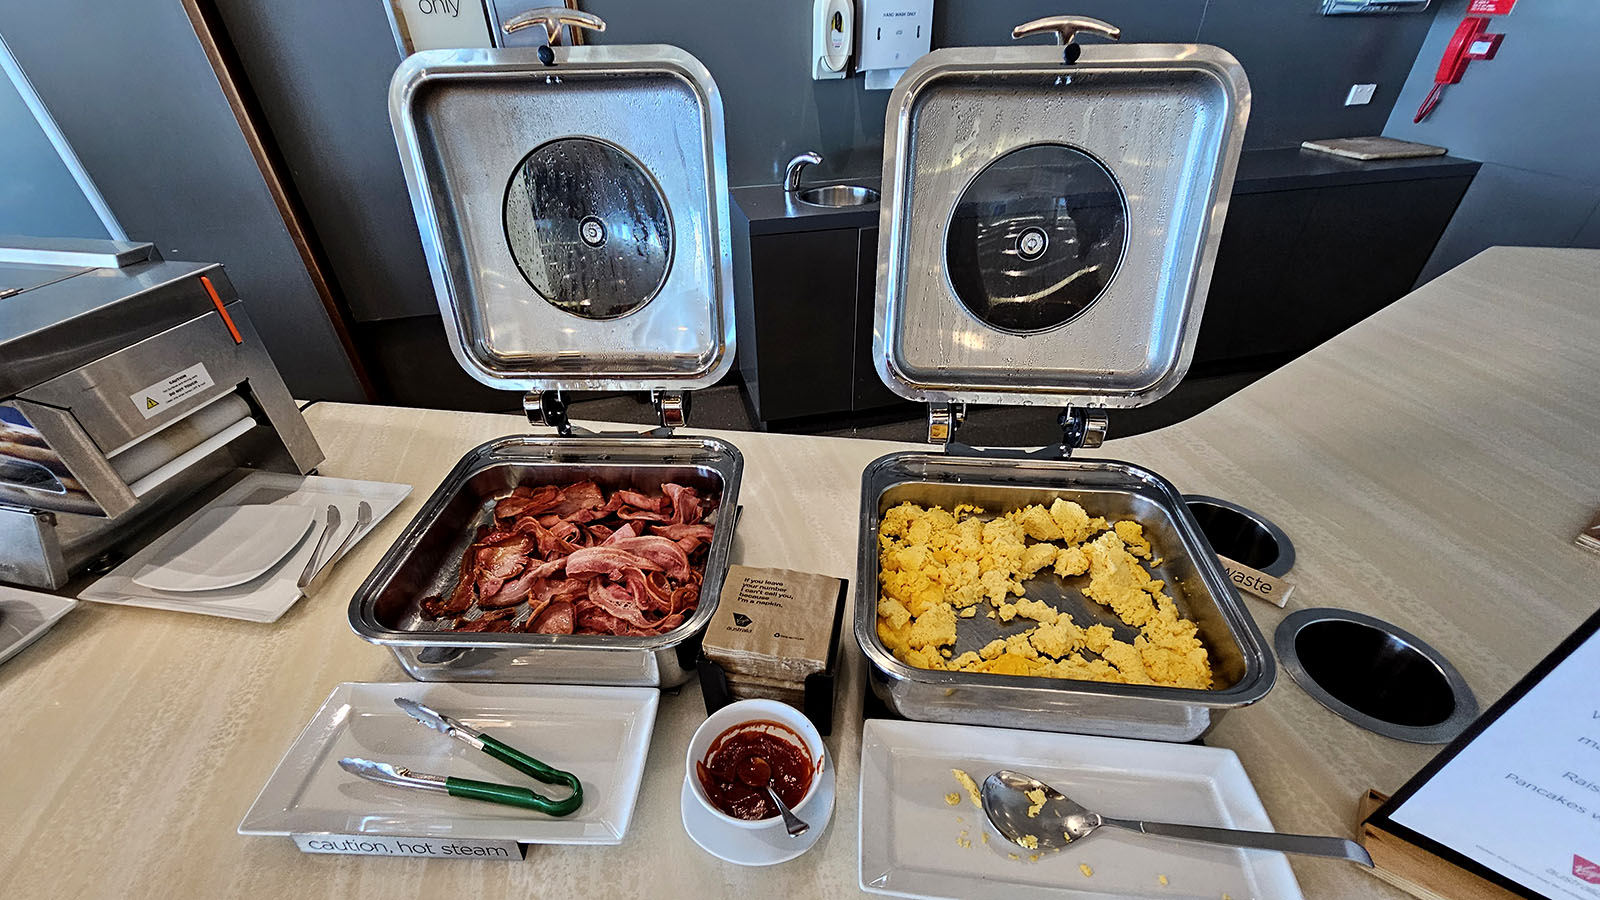 Bacon and eggs in the Virgin Australia Lounge, Canberra